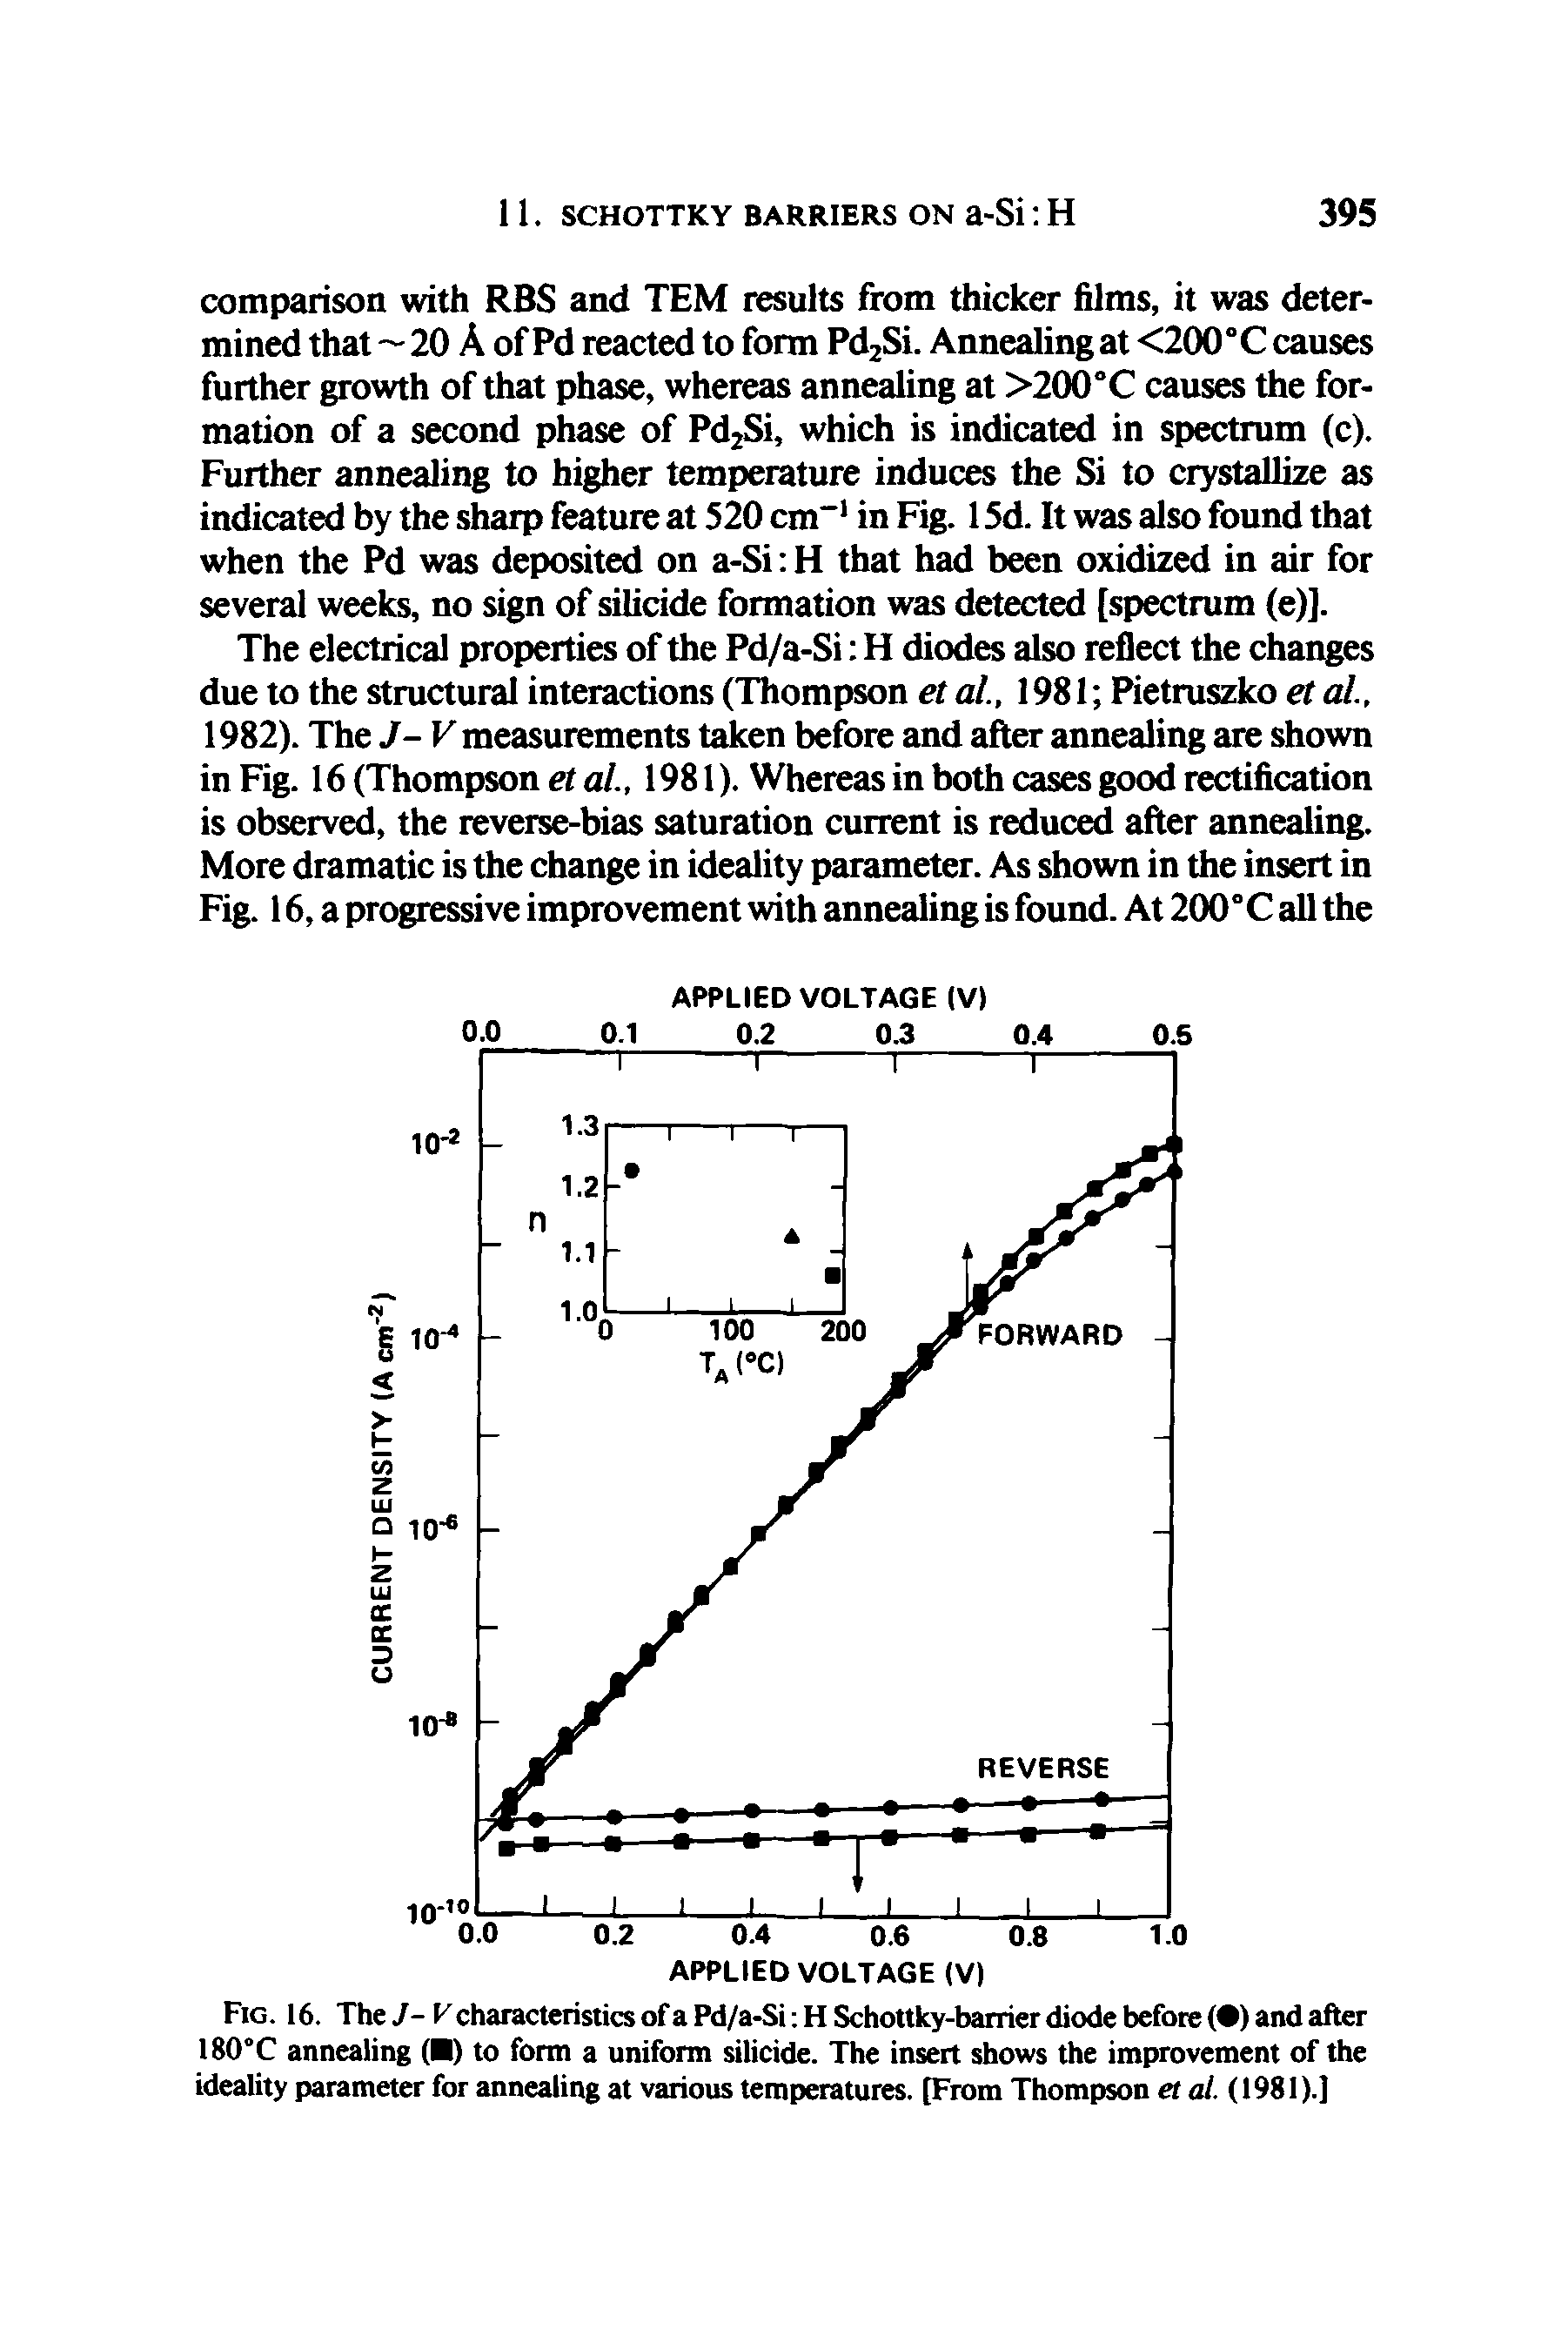 Fig. 16. The J- V characteristics of a Pd/a-Si H Schottky-barrier diode before ( ) and after ISO C annealing ( ) to form a uniform silicide. The insert shows the improvement of the ideality parameter for annealing at various temperatures. [From Thompson et al. (1981).]...